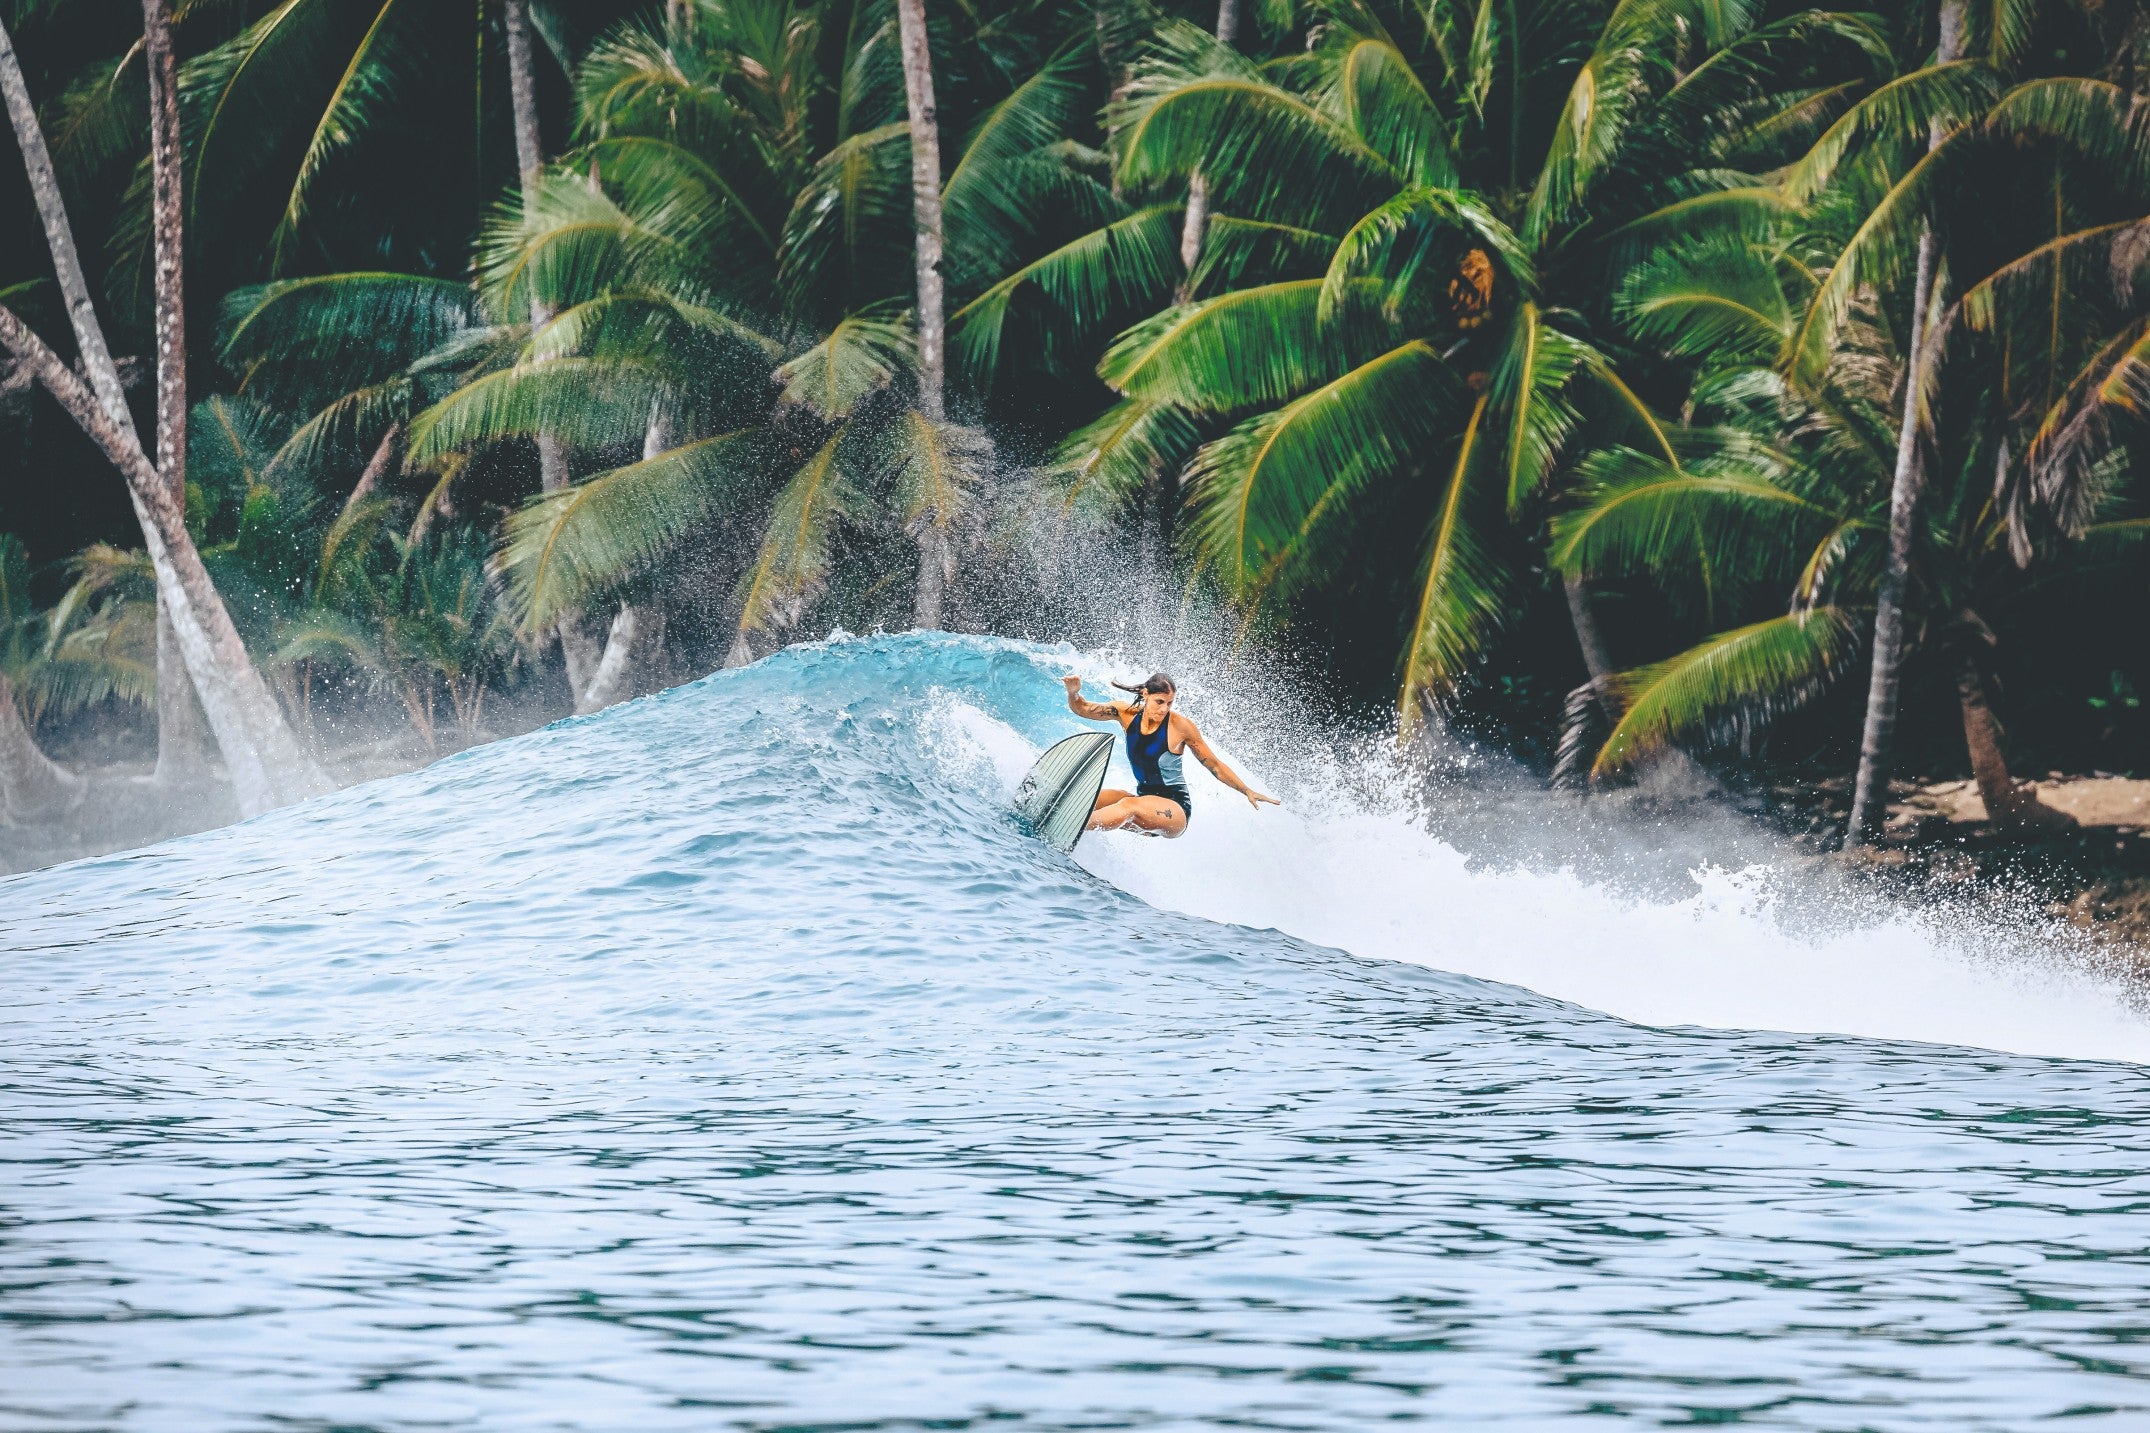 women surfing a wave with a short board. She wears a swimsuit and in the back are palm trees